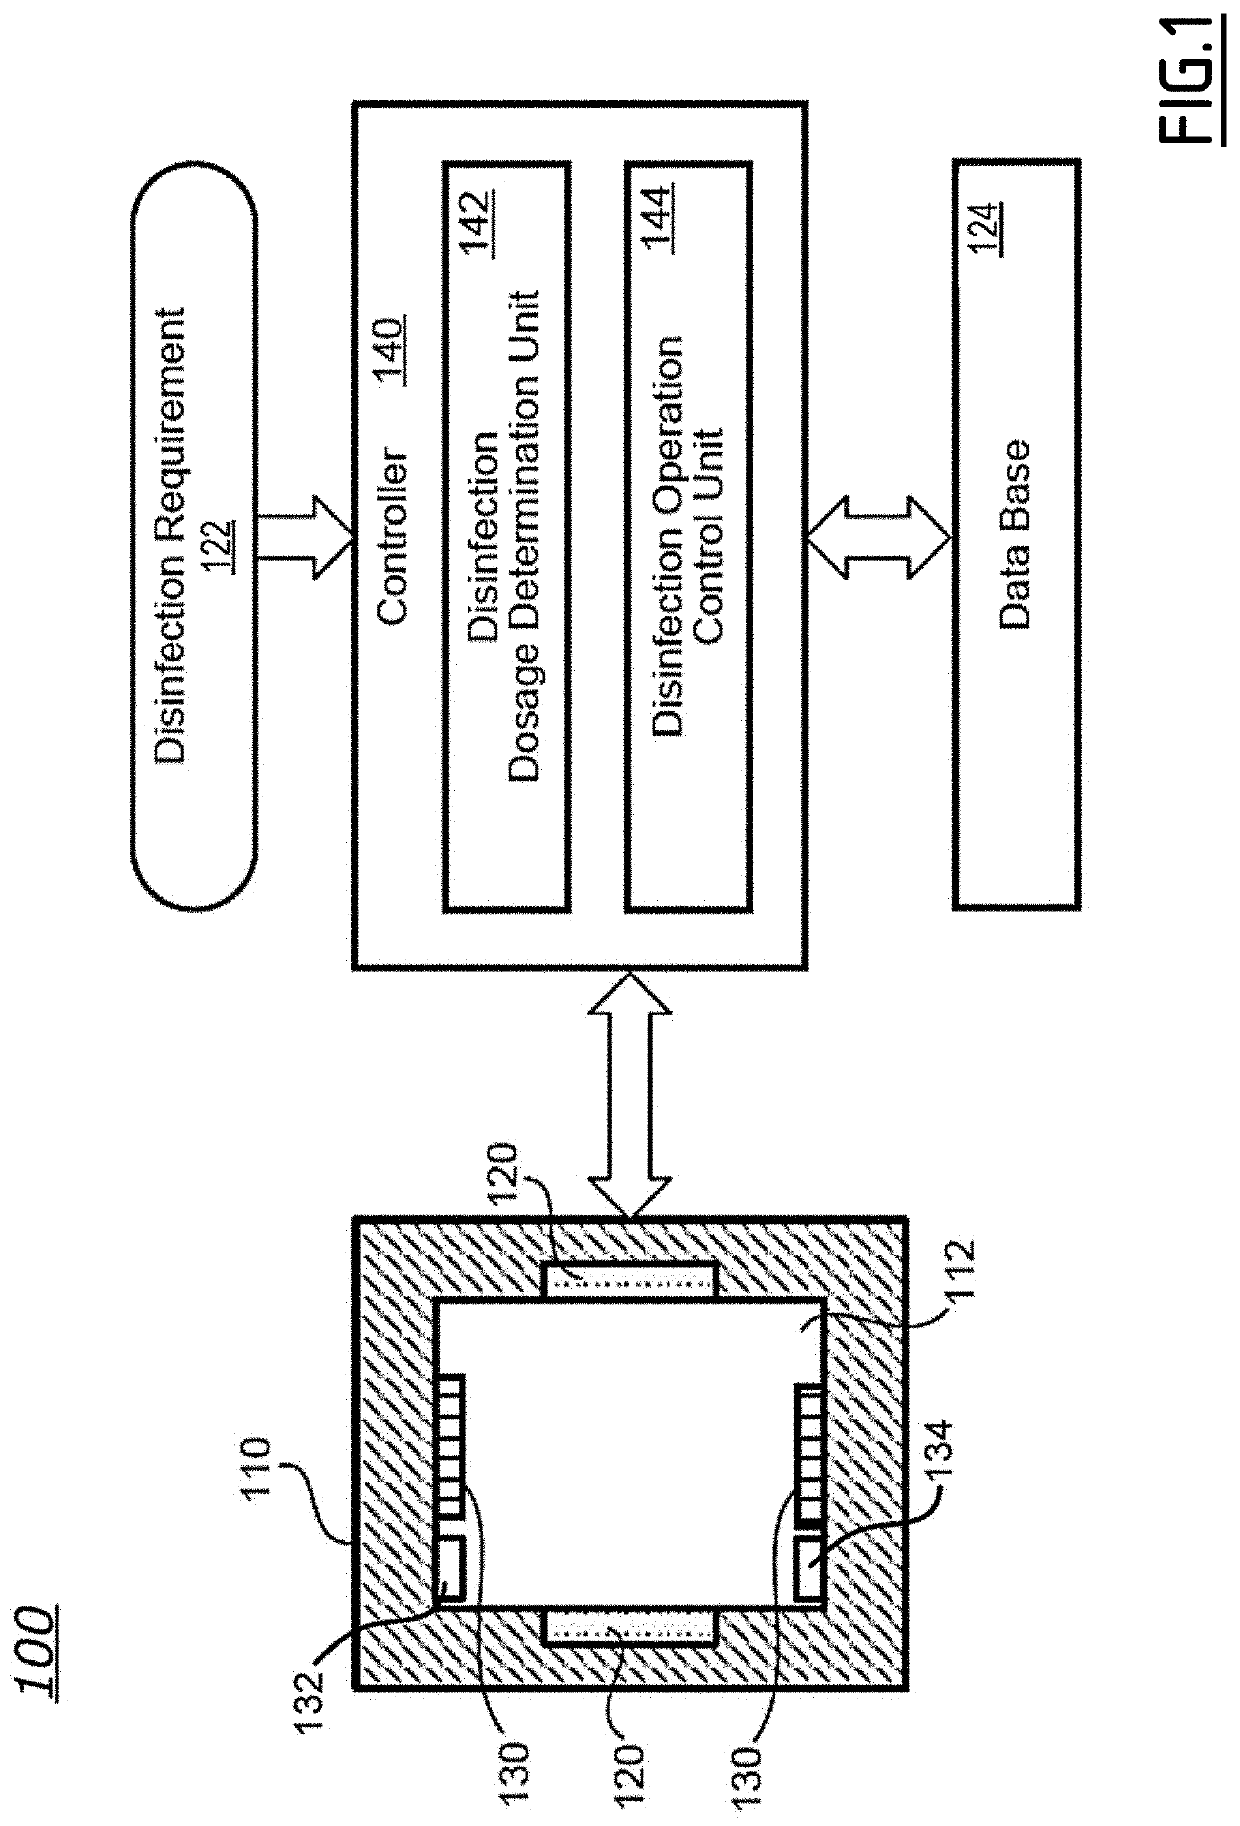 Independent monitoring circuit for a disinfection system